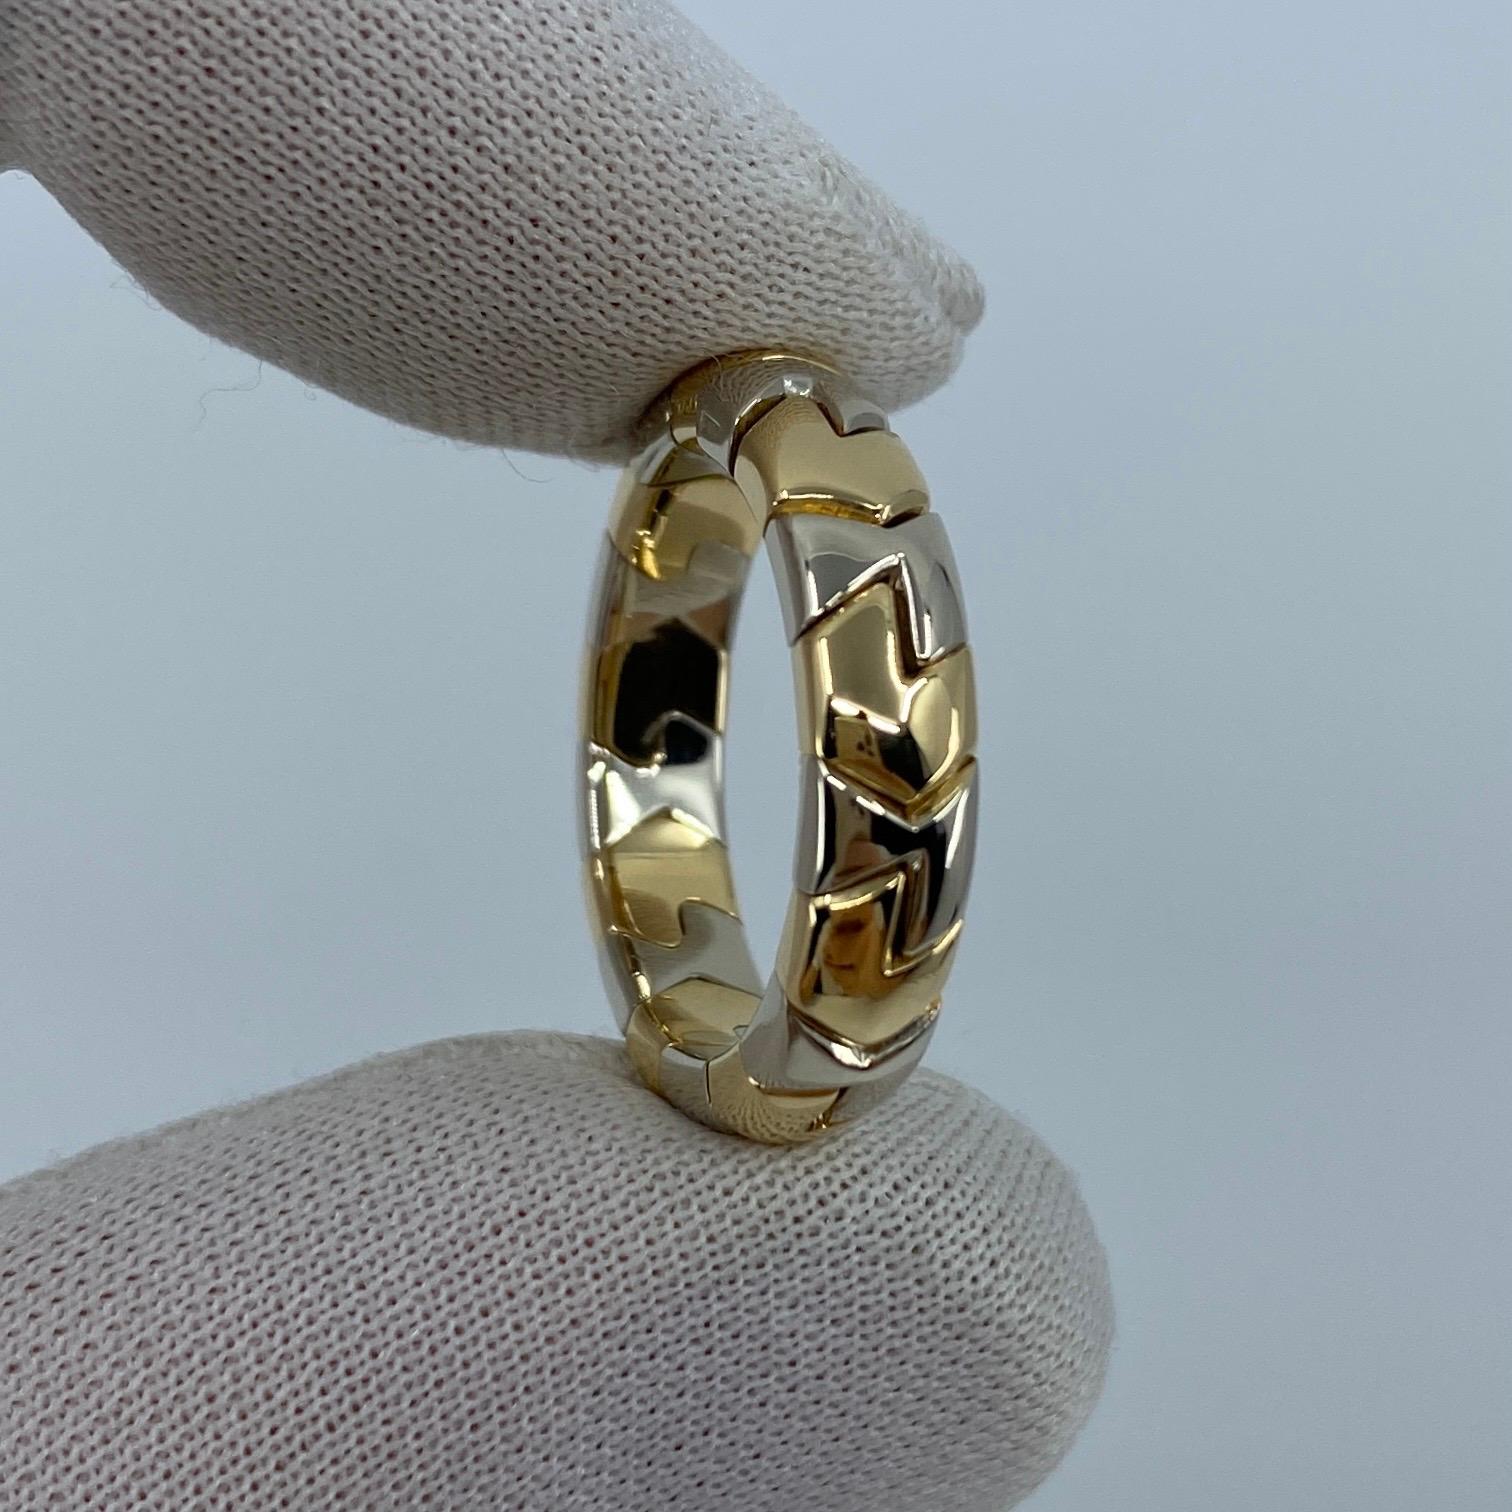 Very Rare Vintage Bvlgari Alveare 18 Karat Gold & Steel Spring Thin Band Ring.

A beautiful and rare vintage 18k yellow gold and stainless steel Bvlgari Alveare ring with flexible spring design.

This stylish and unique spring design allowing it to